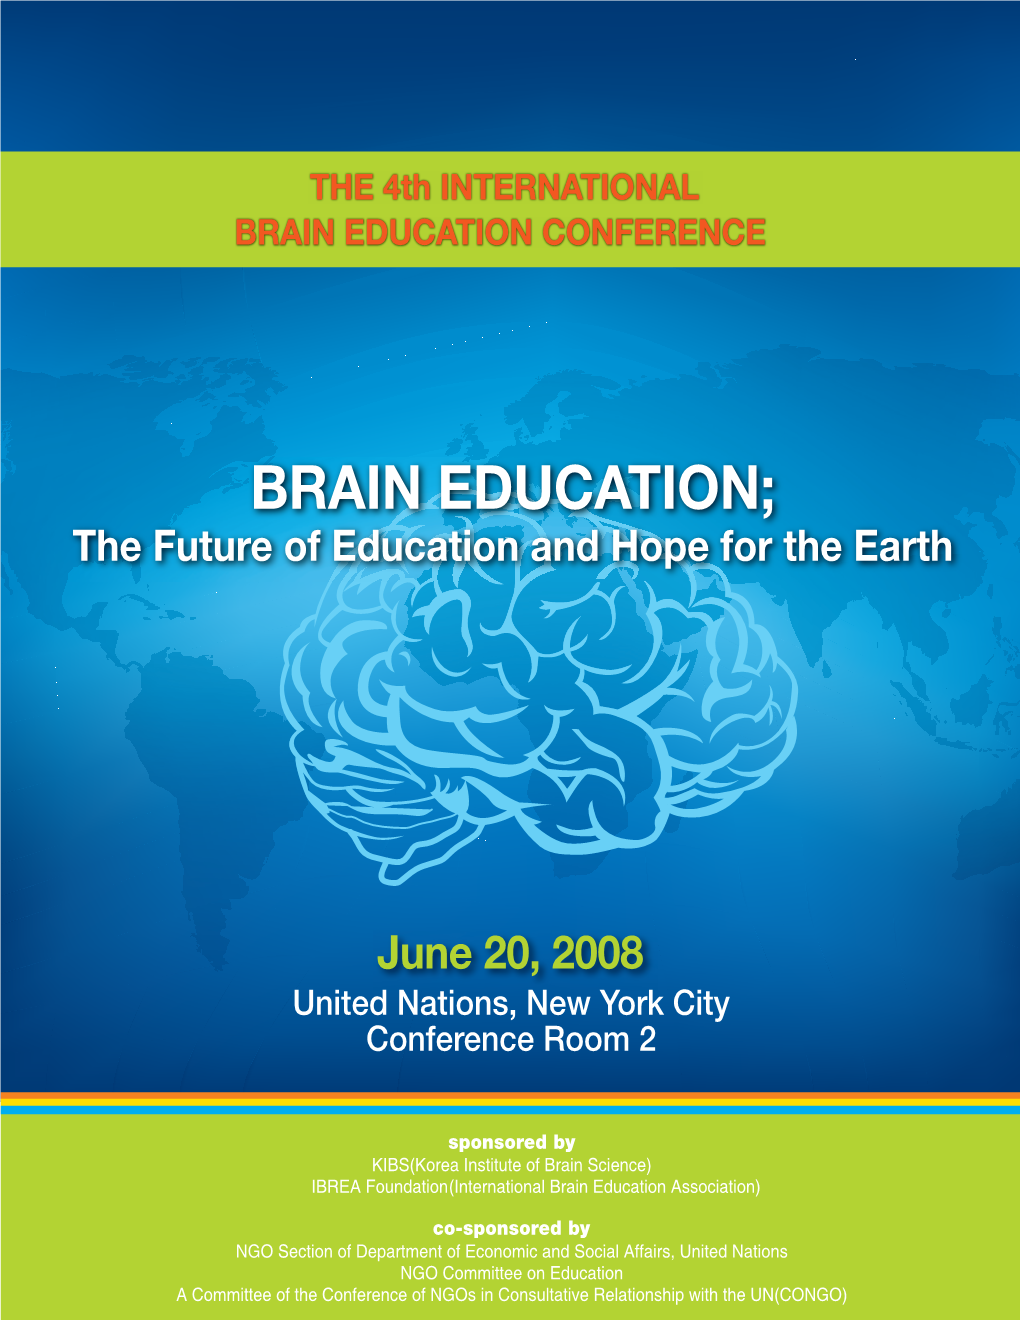 The Fourth International Brain Education Conference